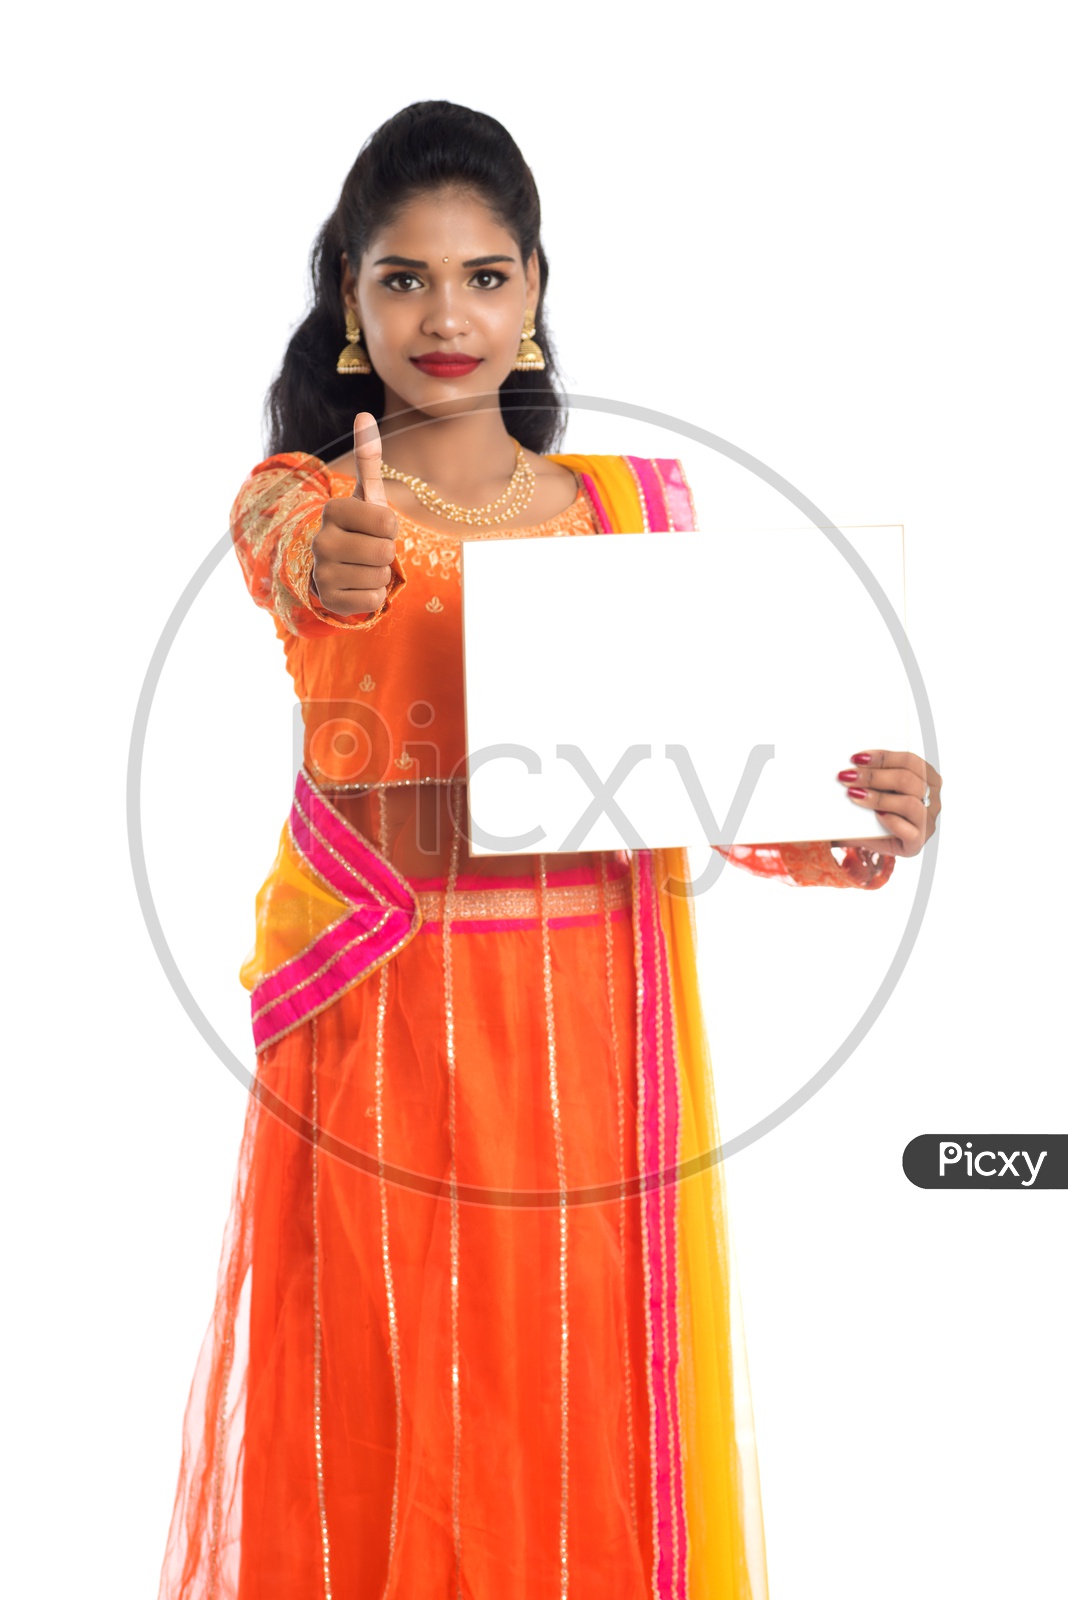 A young pretty Indian woman holding a blank white board or card with a thumbs up gesture